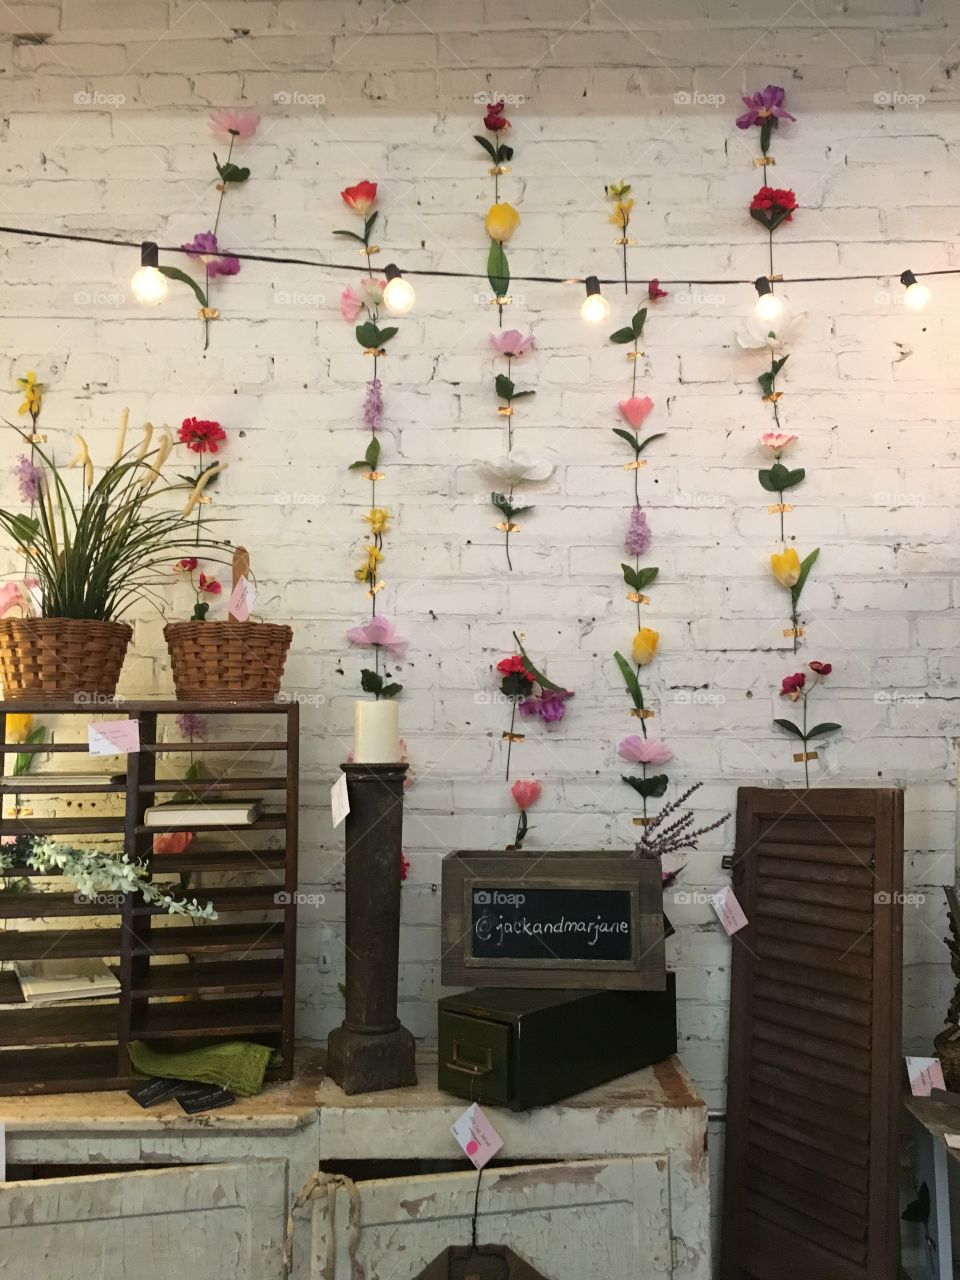 Floral wall decor at an antique mall!